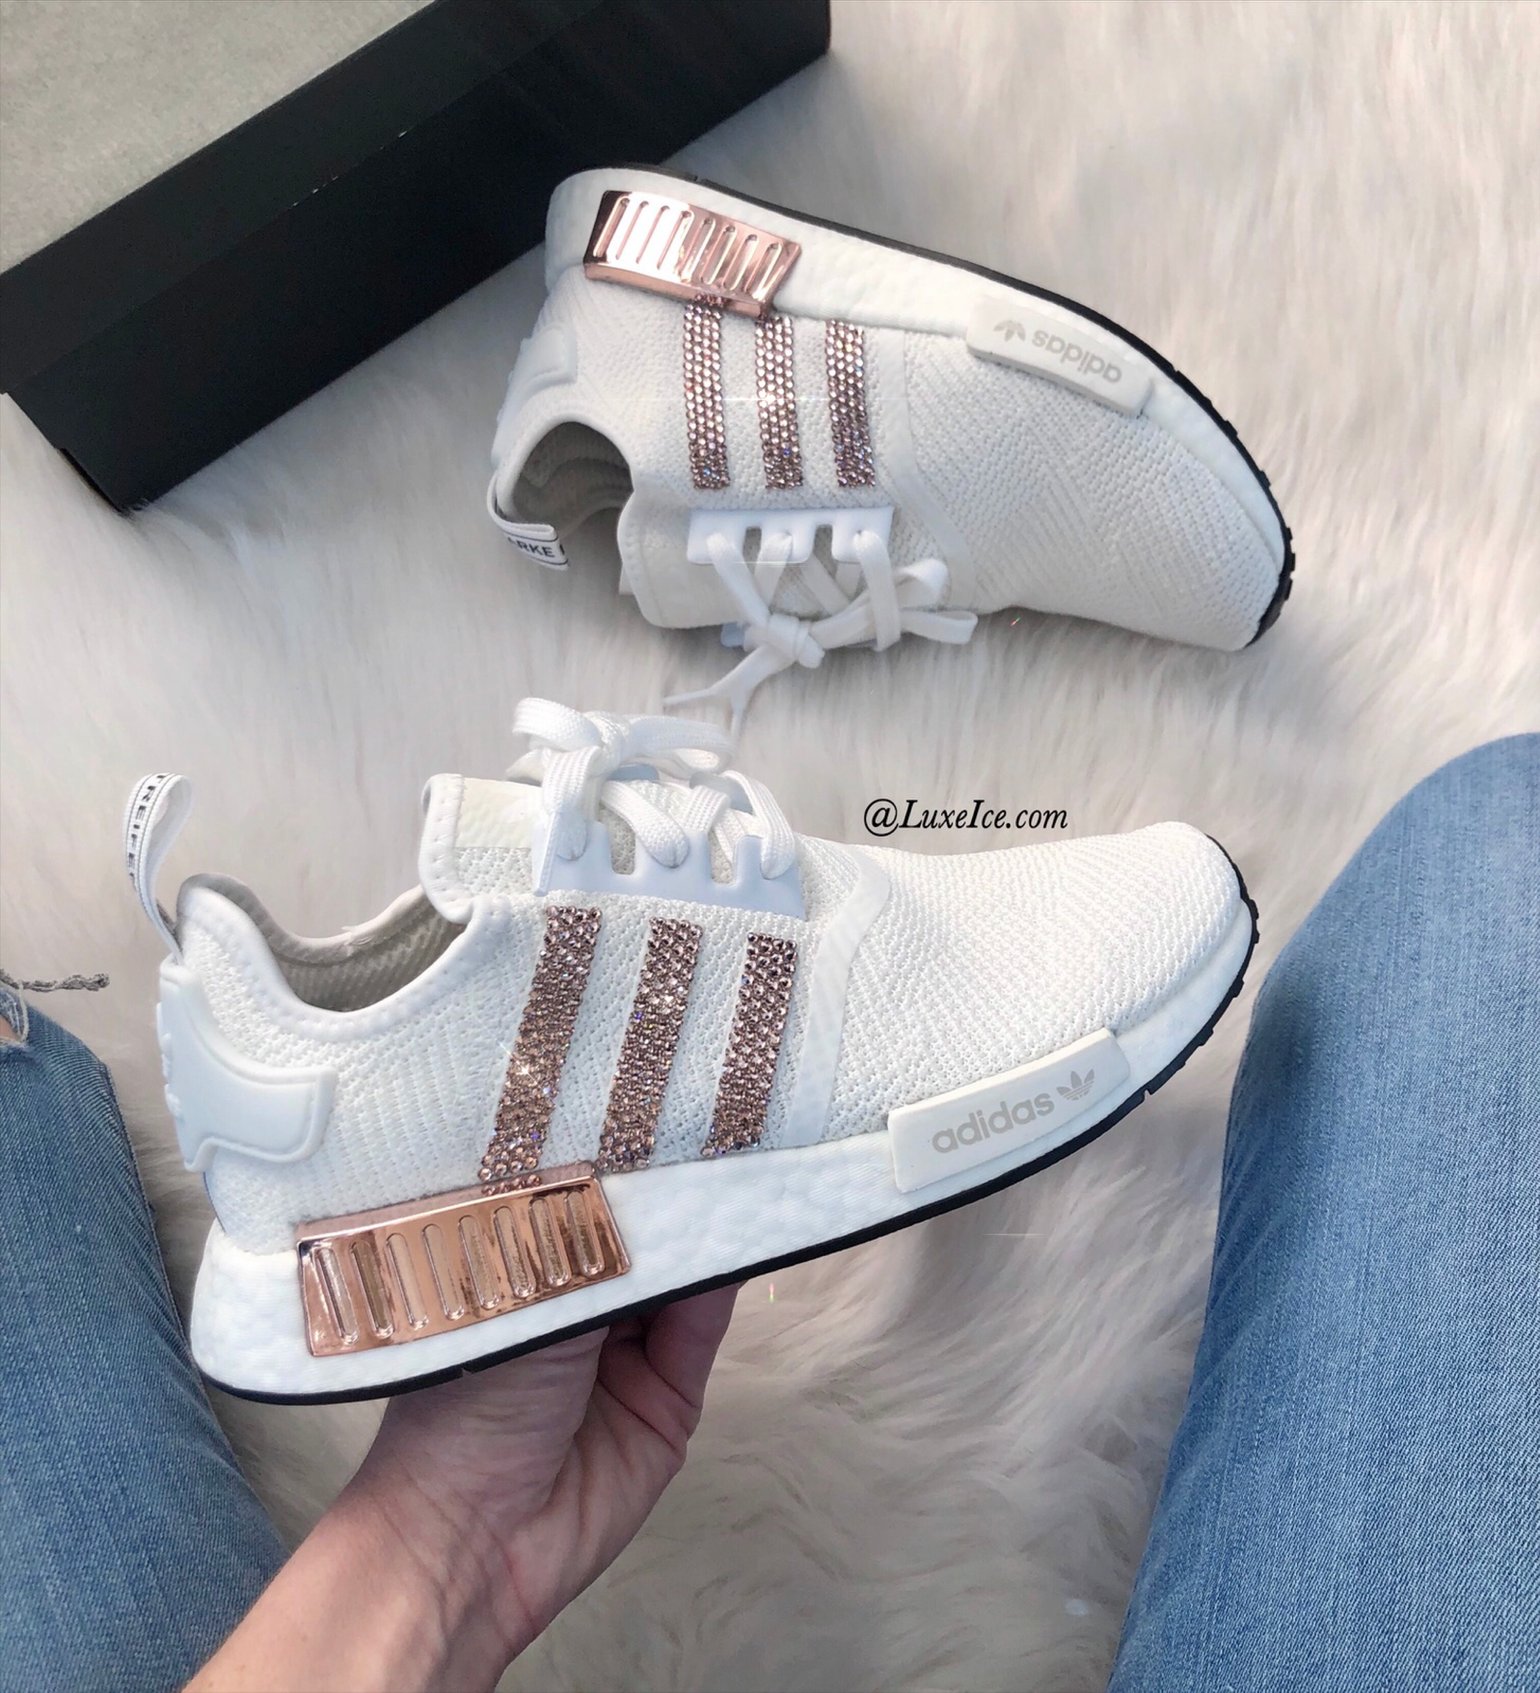 Image of Swarovski Adidas NMD R1 Casual Shoes Cloud White/Copper Metallic customized with Swarovski Crystals.